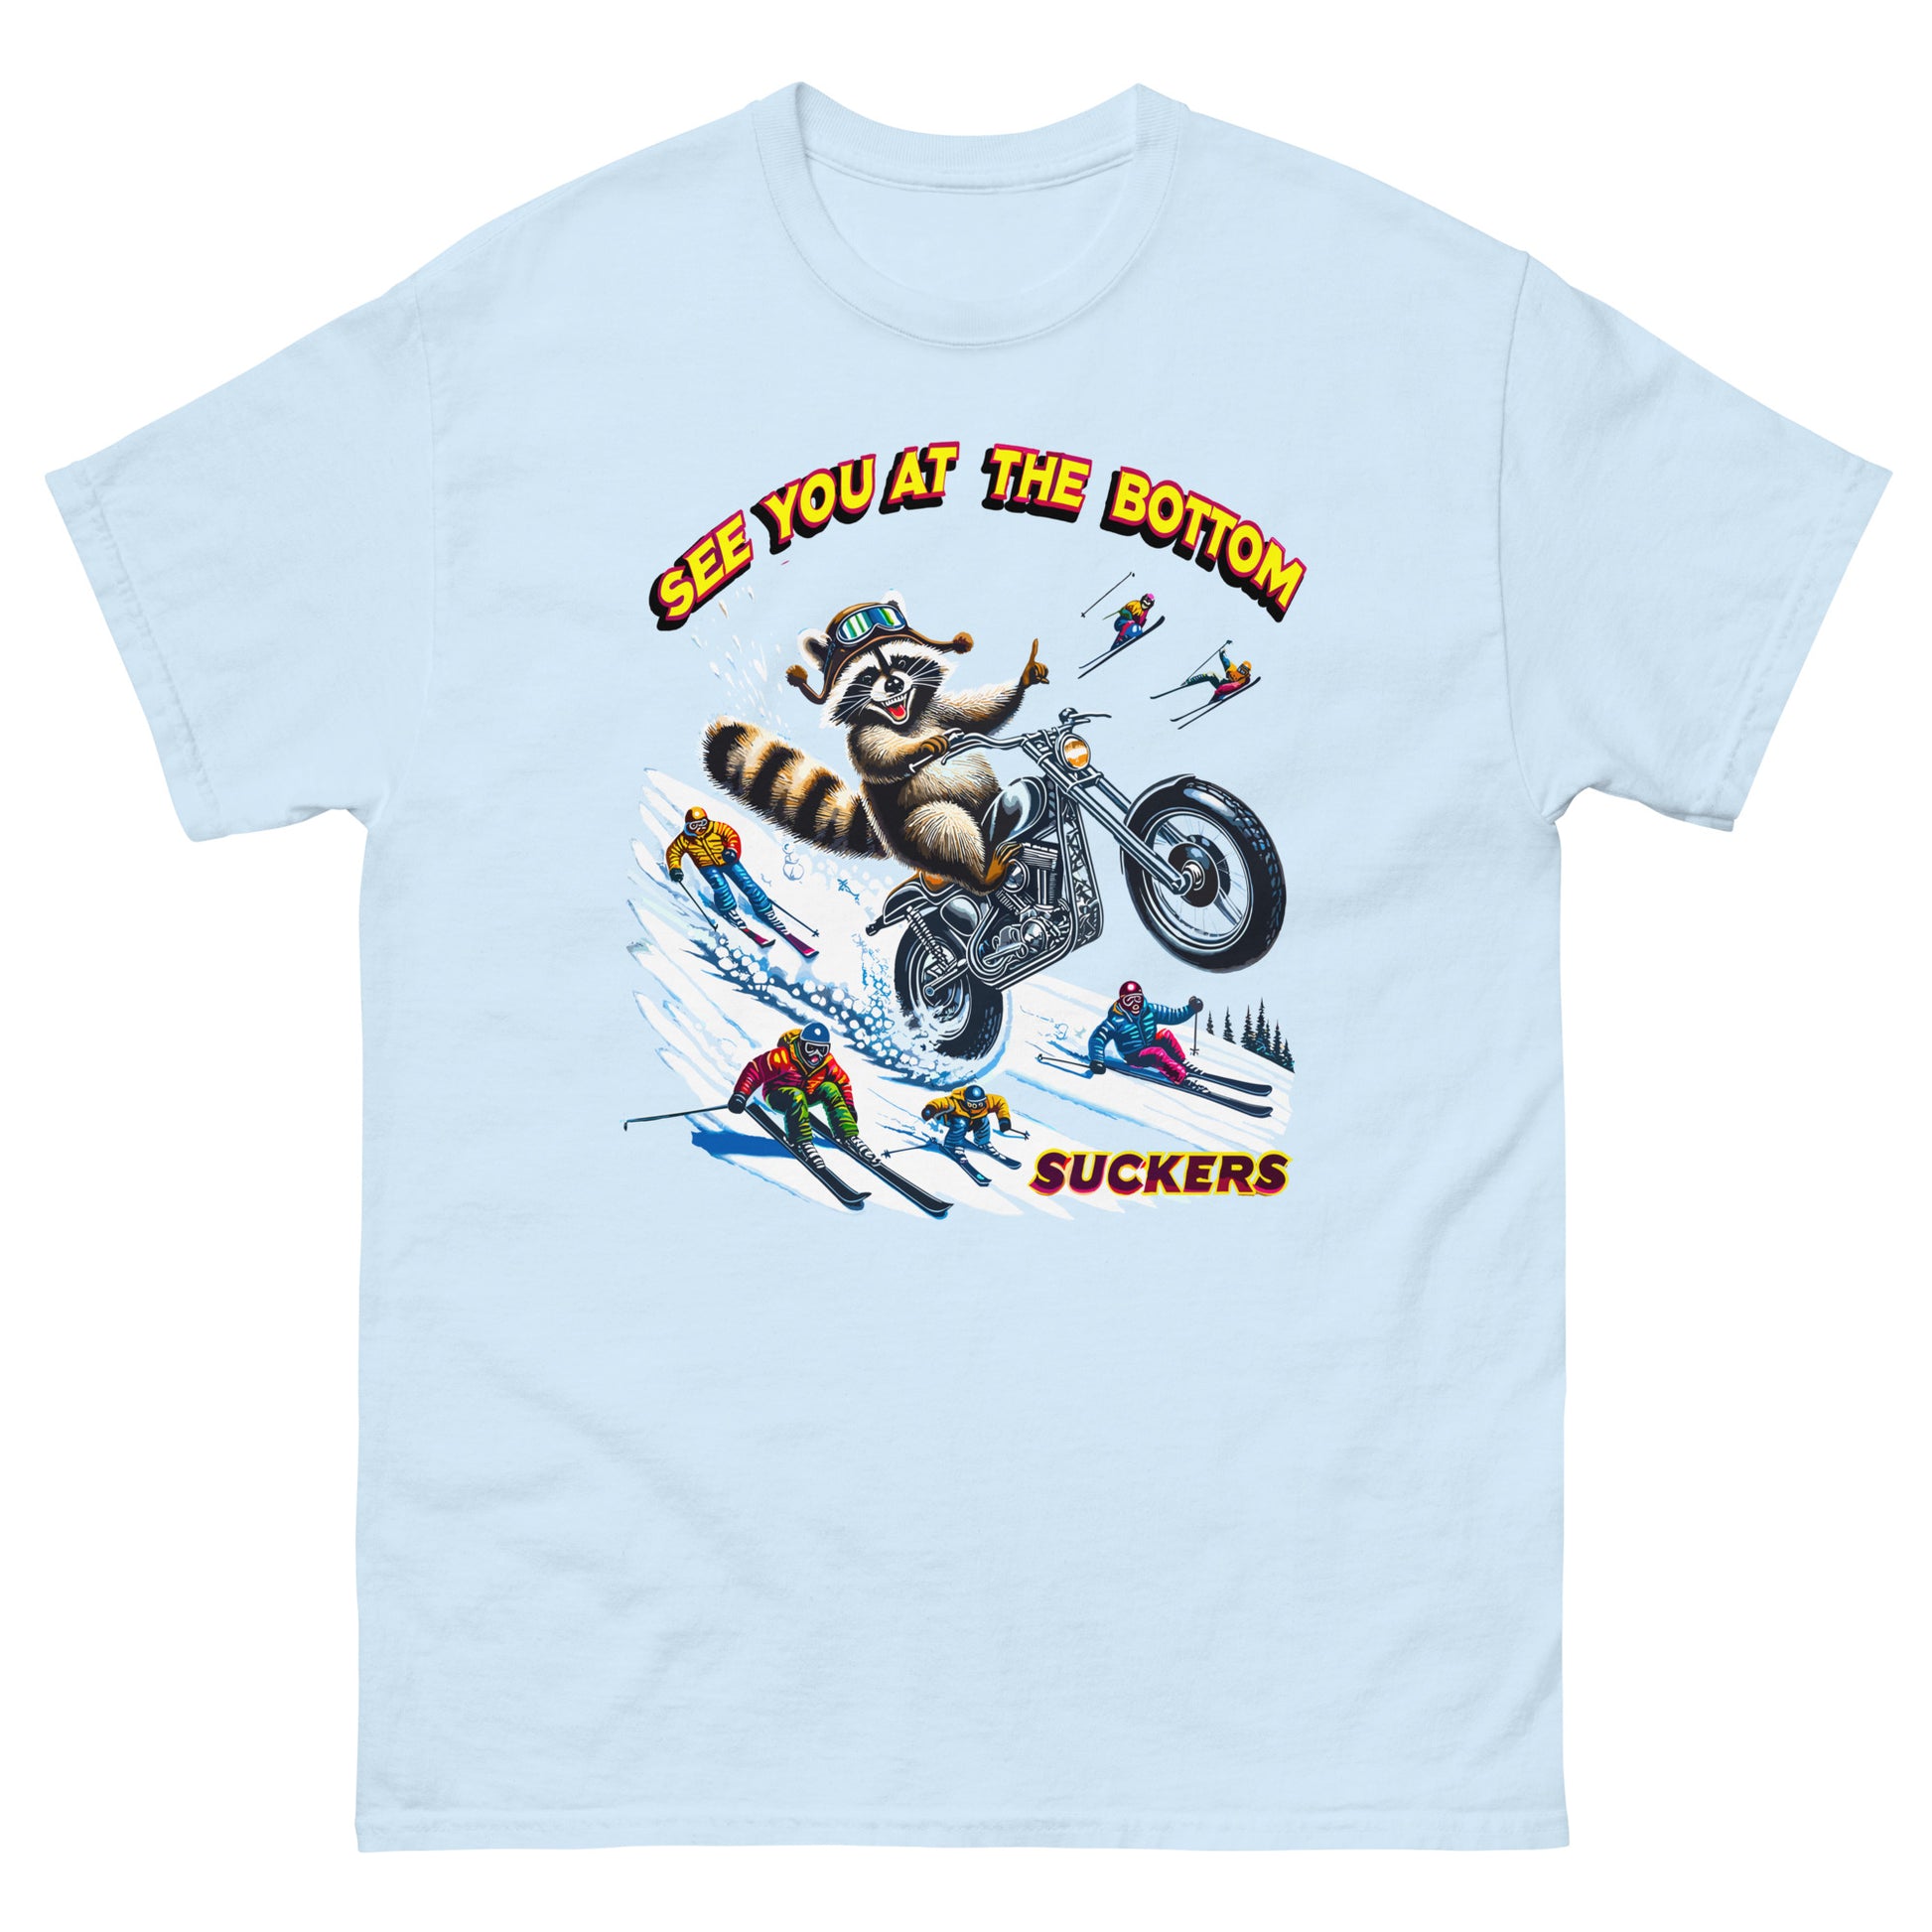 See you at the bottom suckers, racoon biking down the snow, printed t-shirt by Whistler Shirts